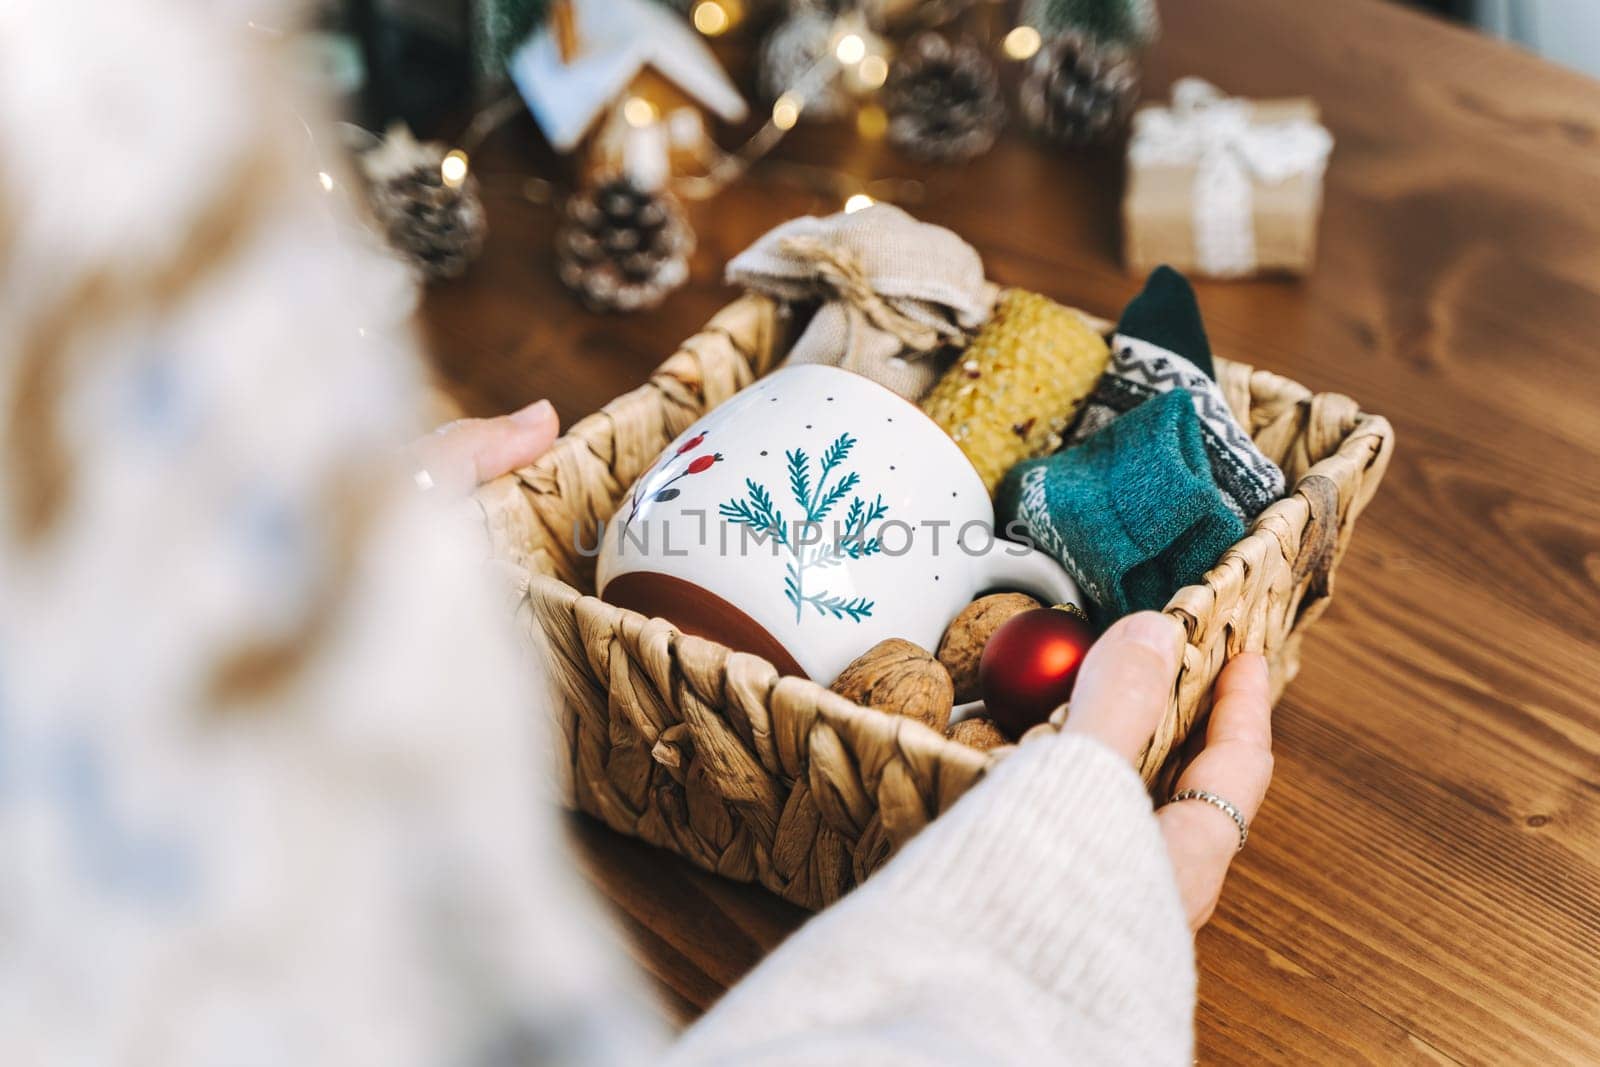 Woman s hands wrapping Christmas eco gift wicker basket, close up. Unprepared presents on wooden table with natural decor elements and items Christmas packing Concept.